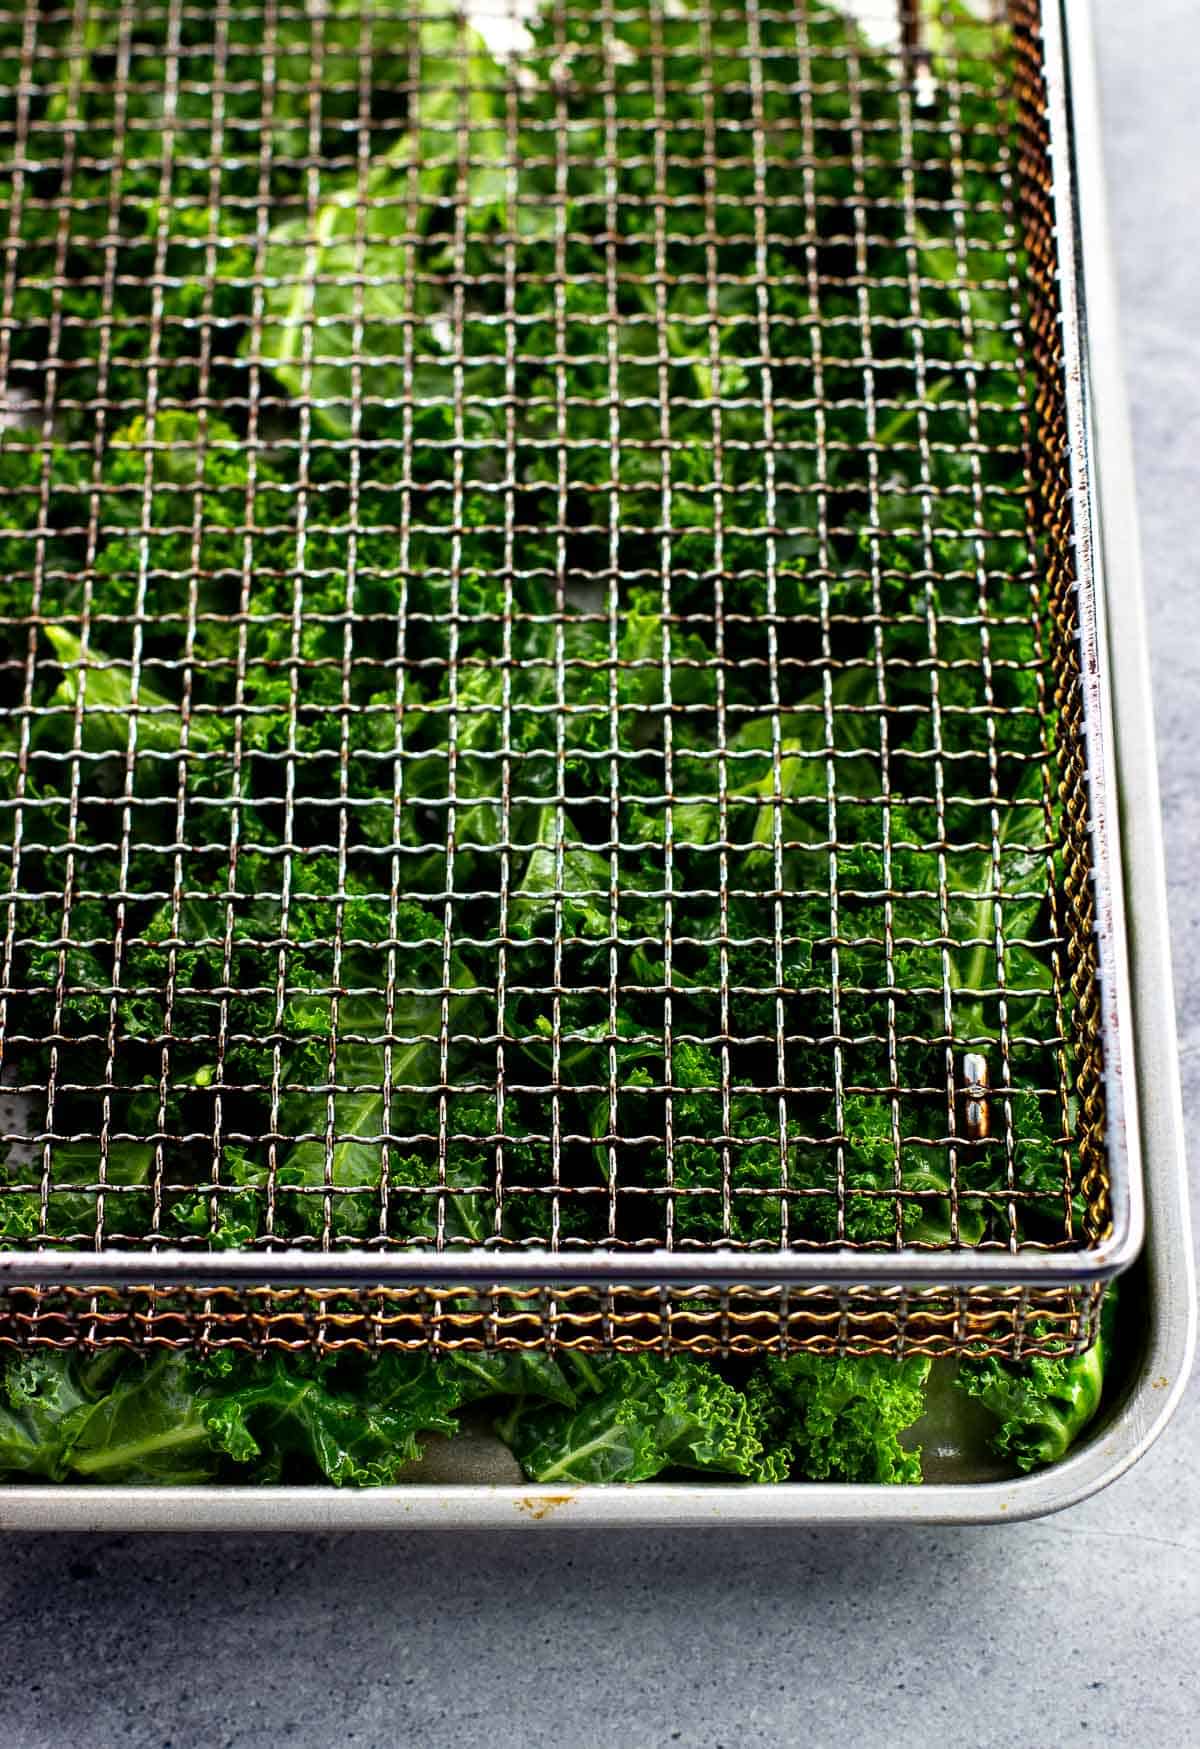 A metal rack situated on top of oiled kale leaves.